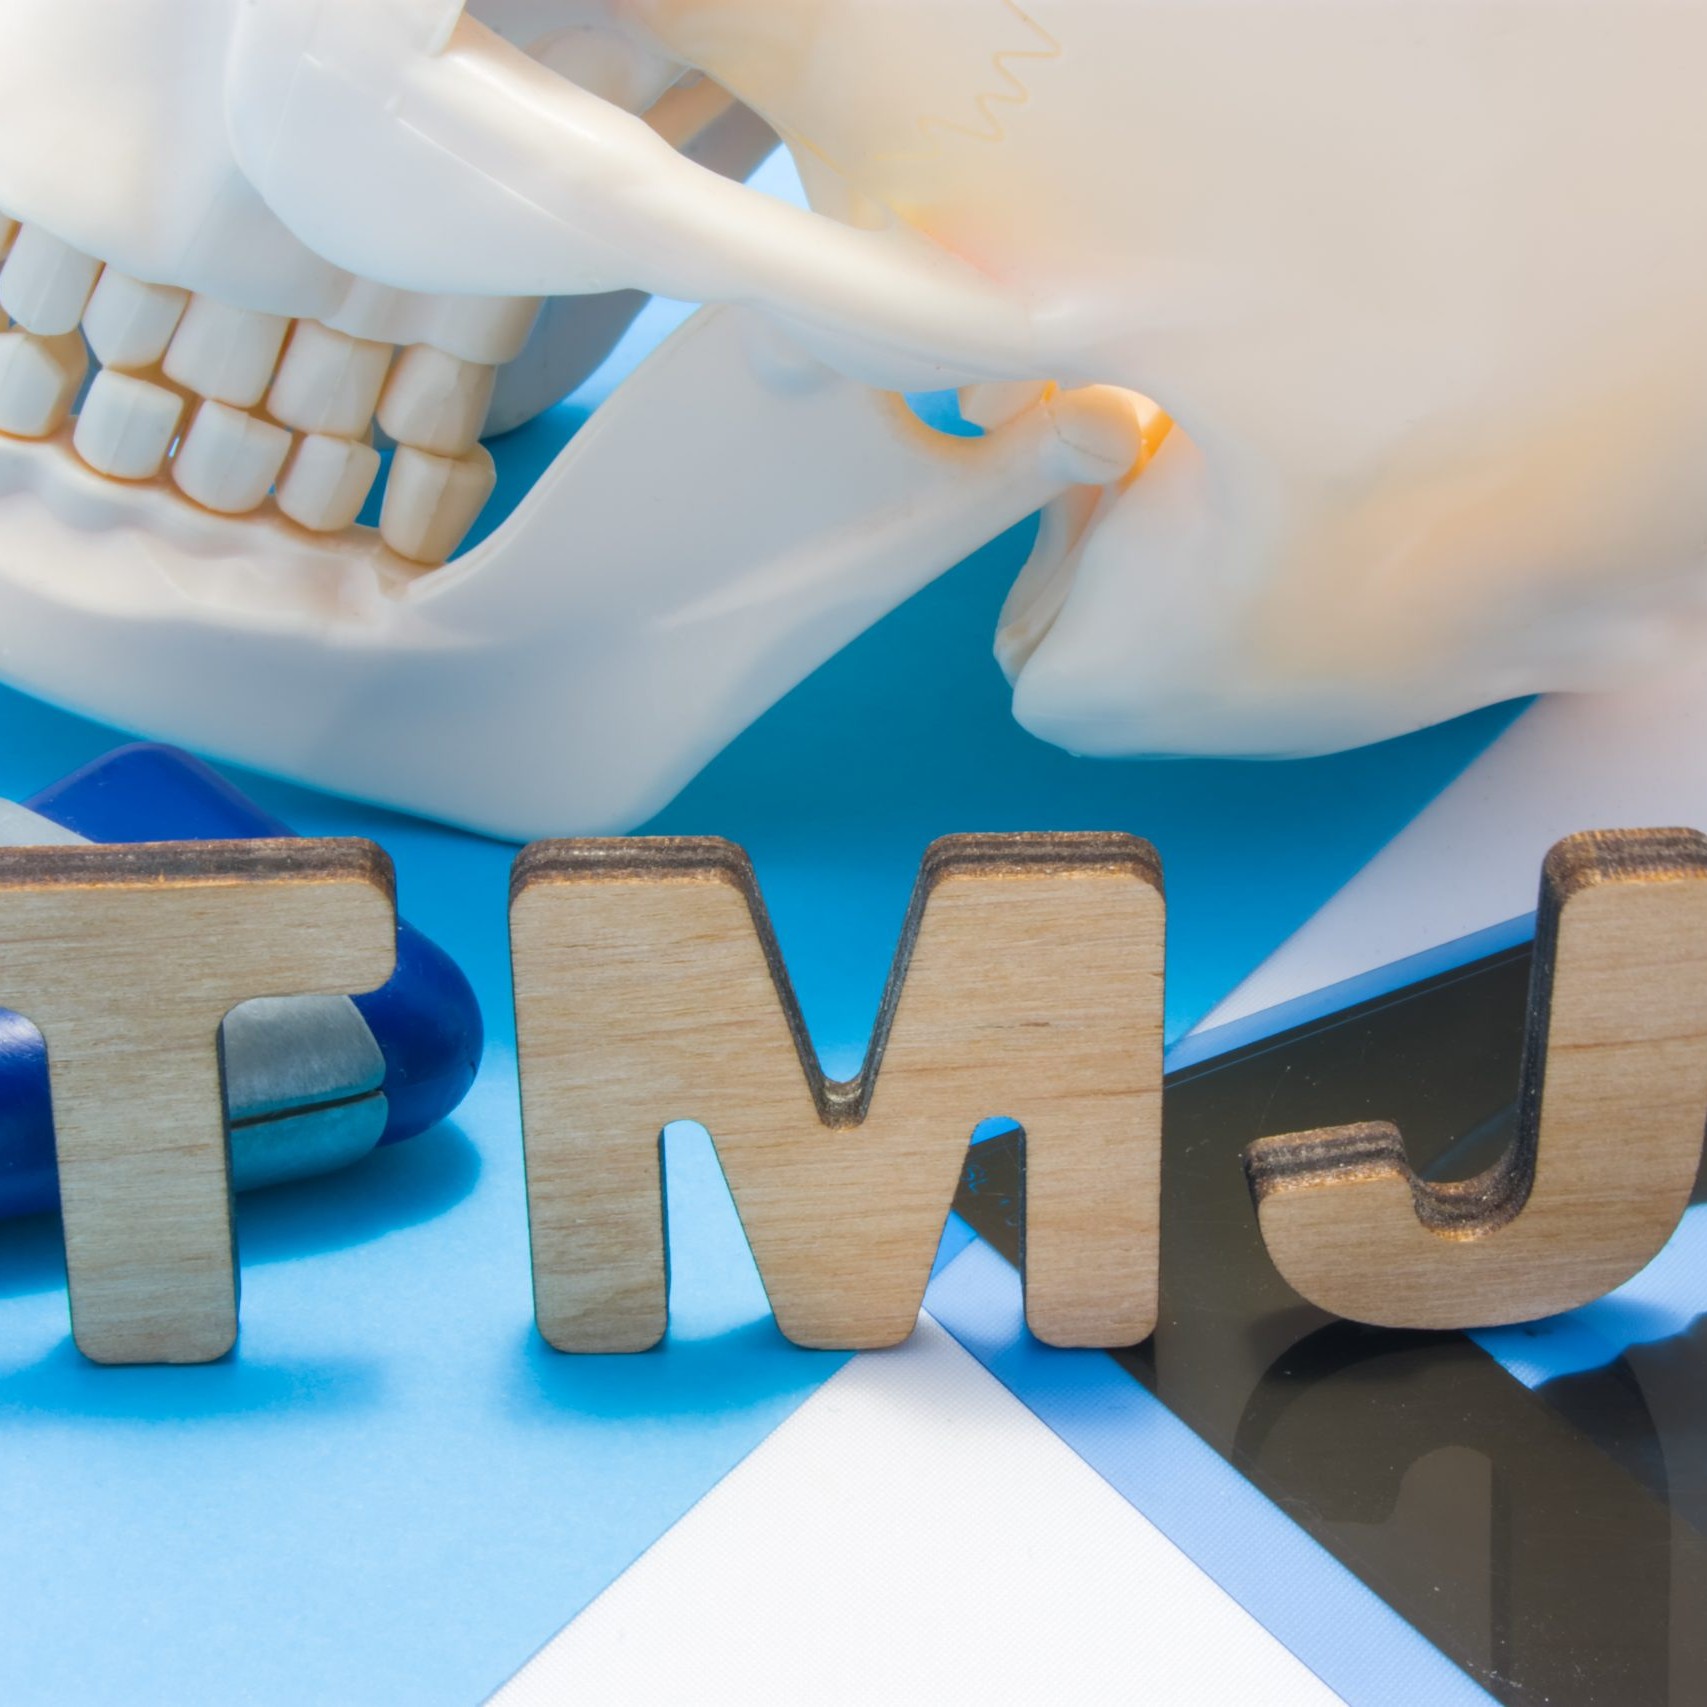 TMJ medical abbreviation of temporomandibular joint. TMJ letters surrounded by human skull with lower jaw, neurological hammer and radiographs. Concept of anatomy, pathology of temporomandibular joint